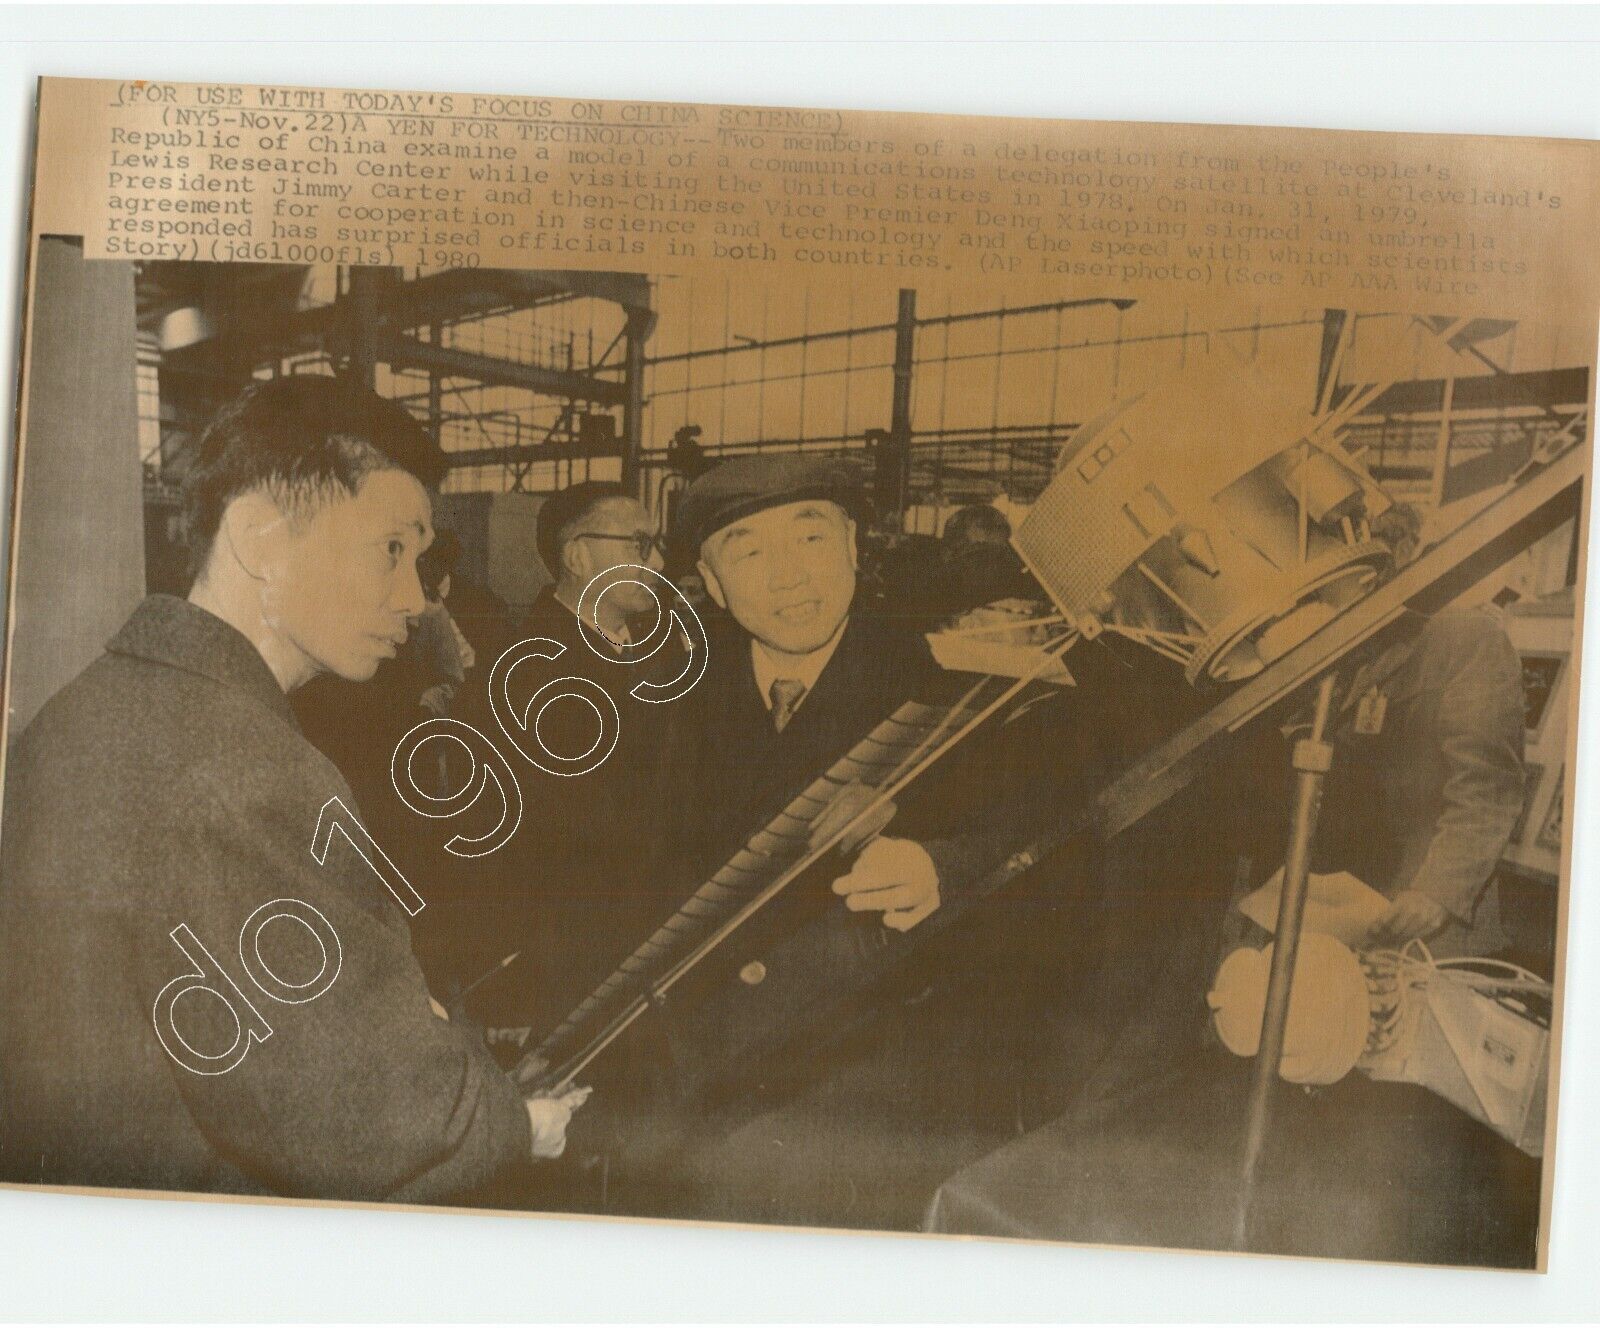 Chinese Delegations Com Satellite Lewis Research Cntr CLEVELAND 1980 Press Photo